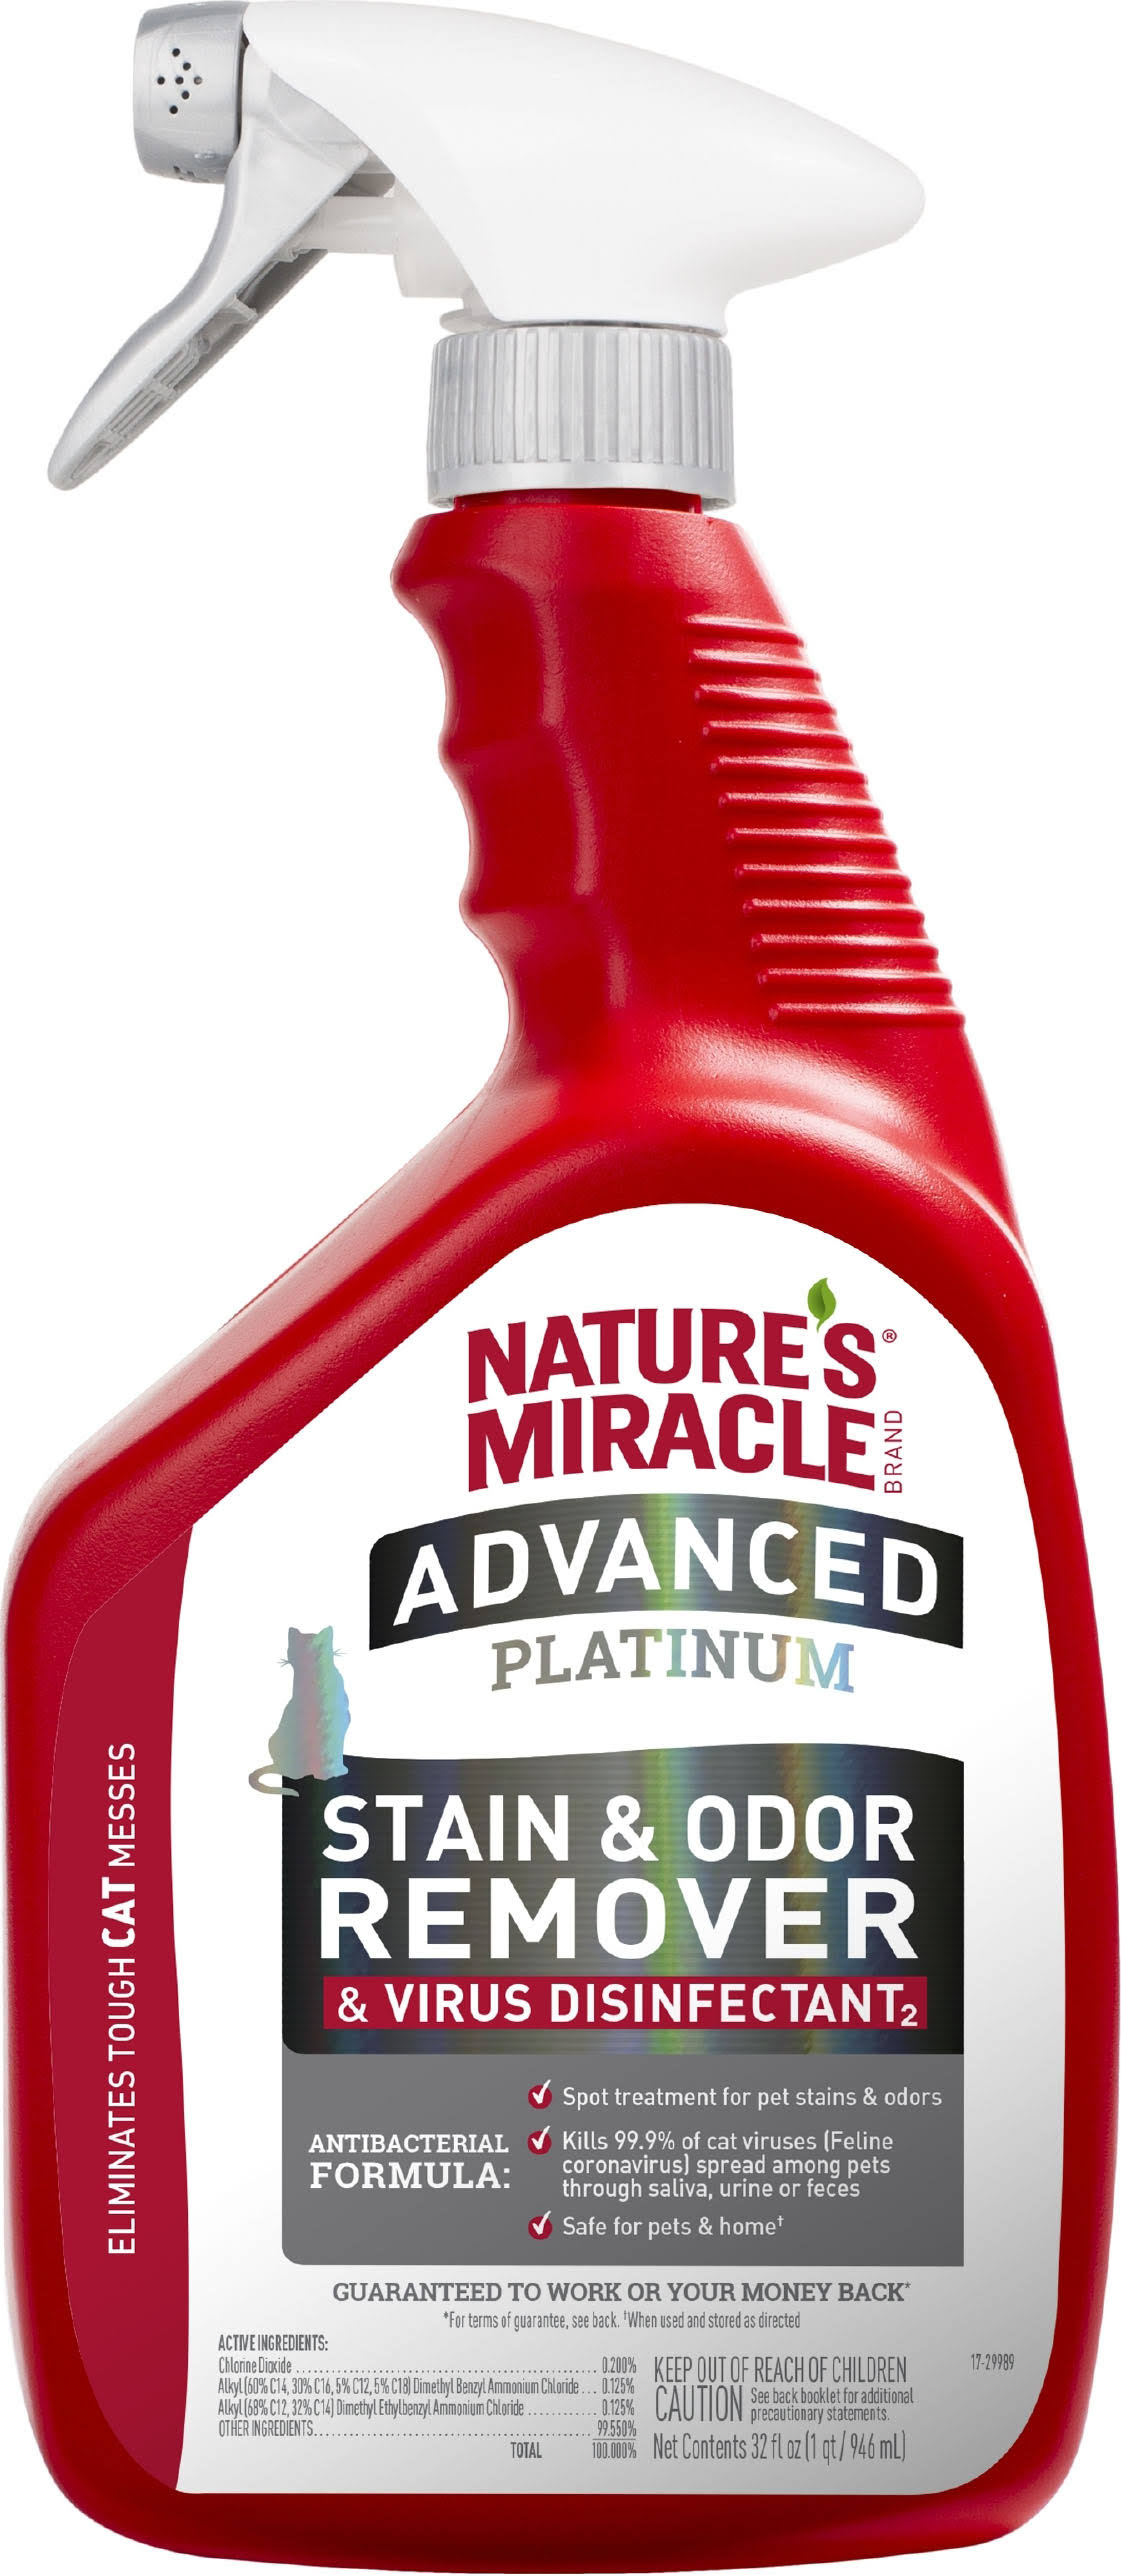 Stain & odor remover & virus disinfectant for cats | Nature's Miracle